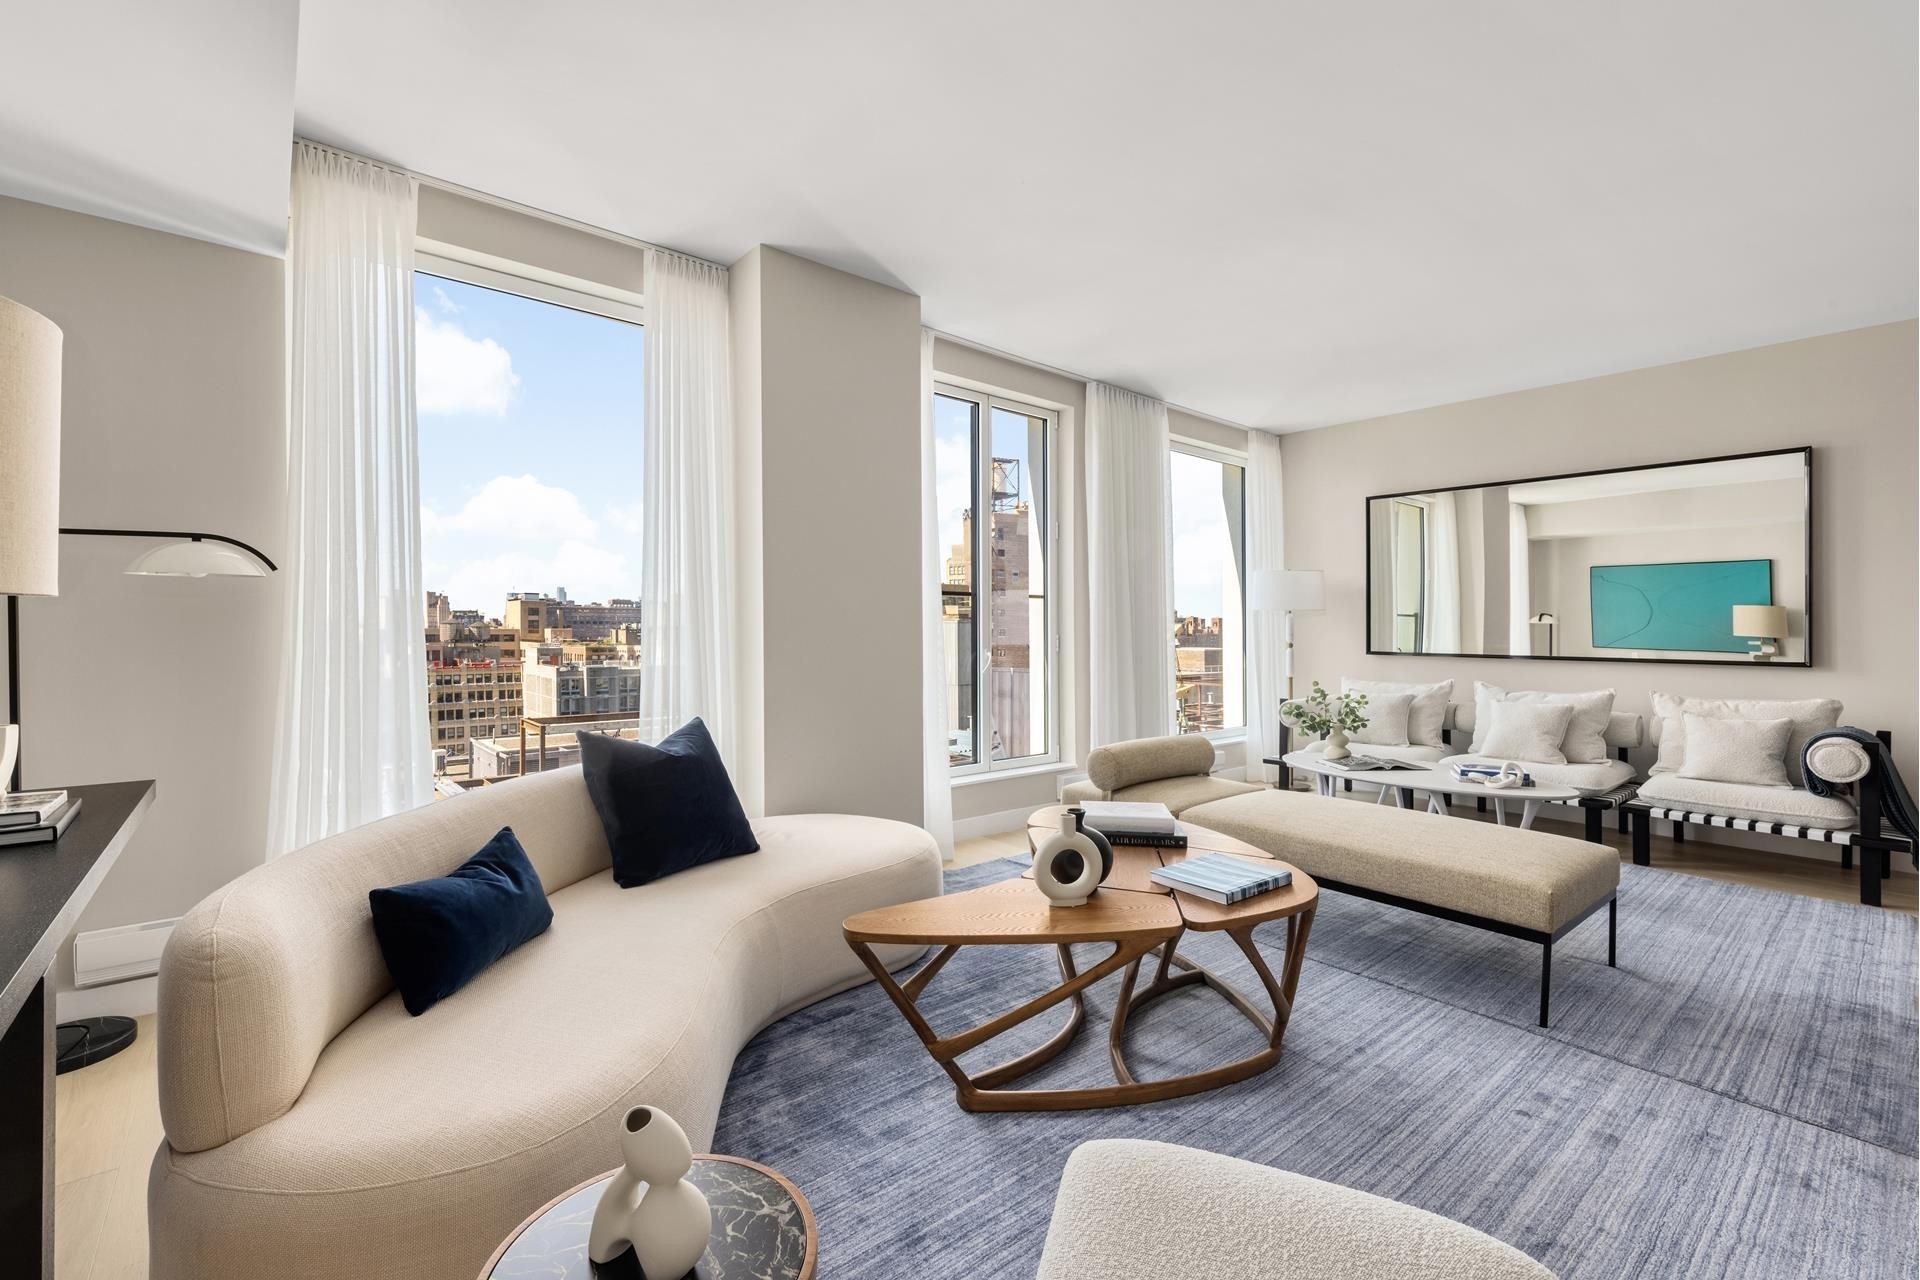 2. Condominiums for Sale at Maverick, 215 W 28TH ST, 16A Chelsea, New York, New York 10001